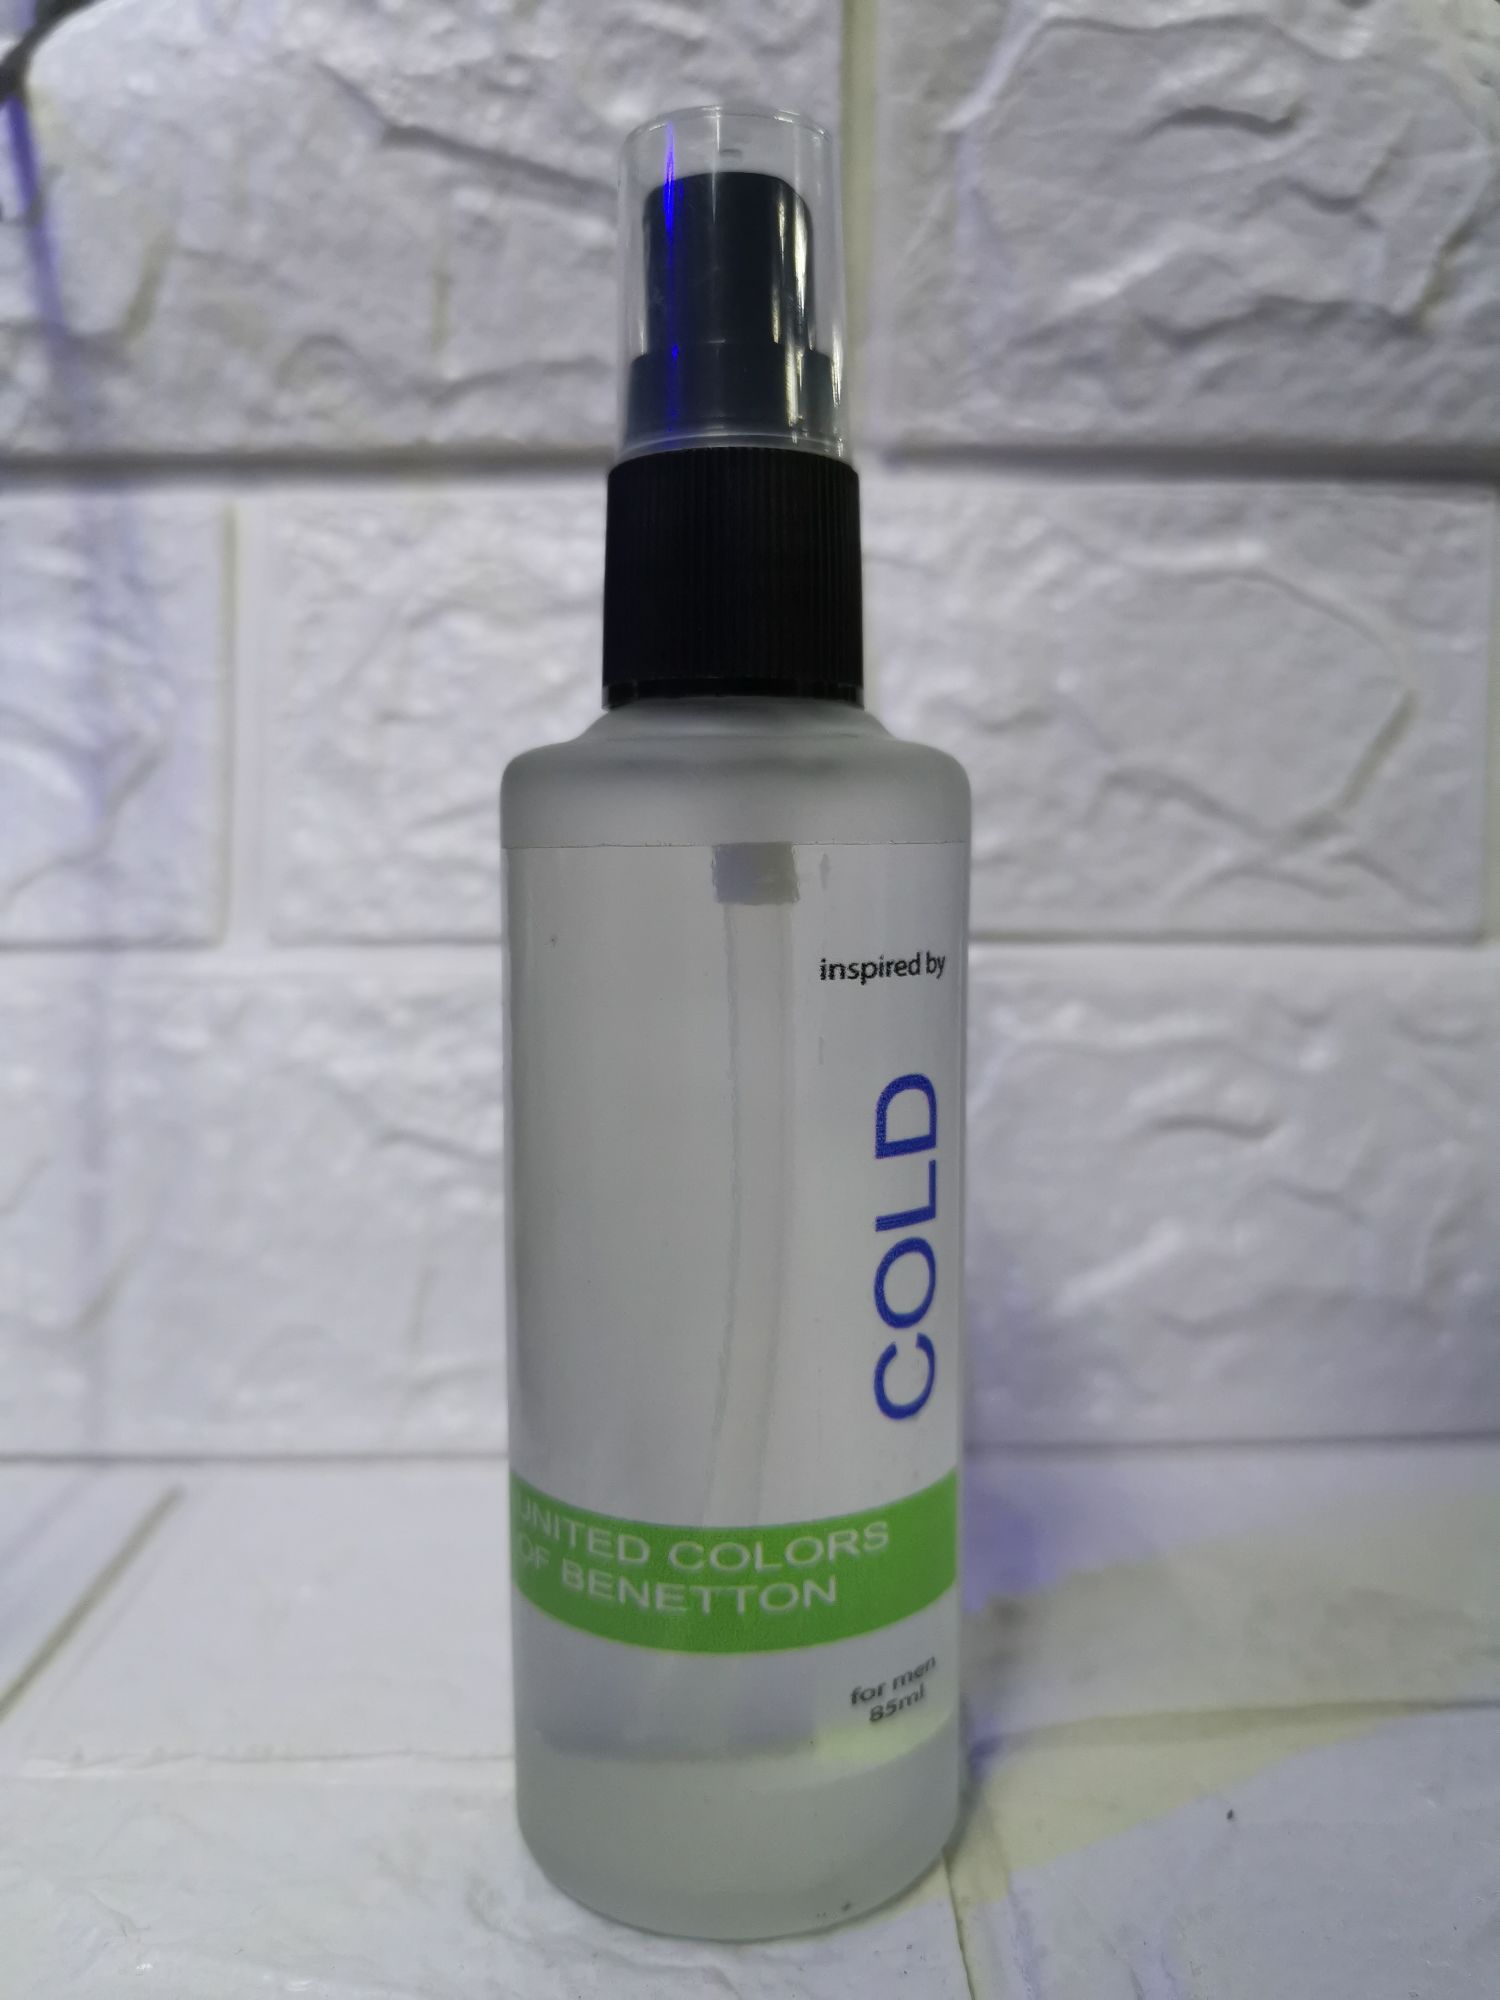 Benetton Cold for Men Long-Lasting Perfume Oil, Affordable Price